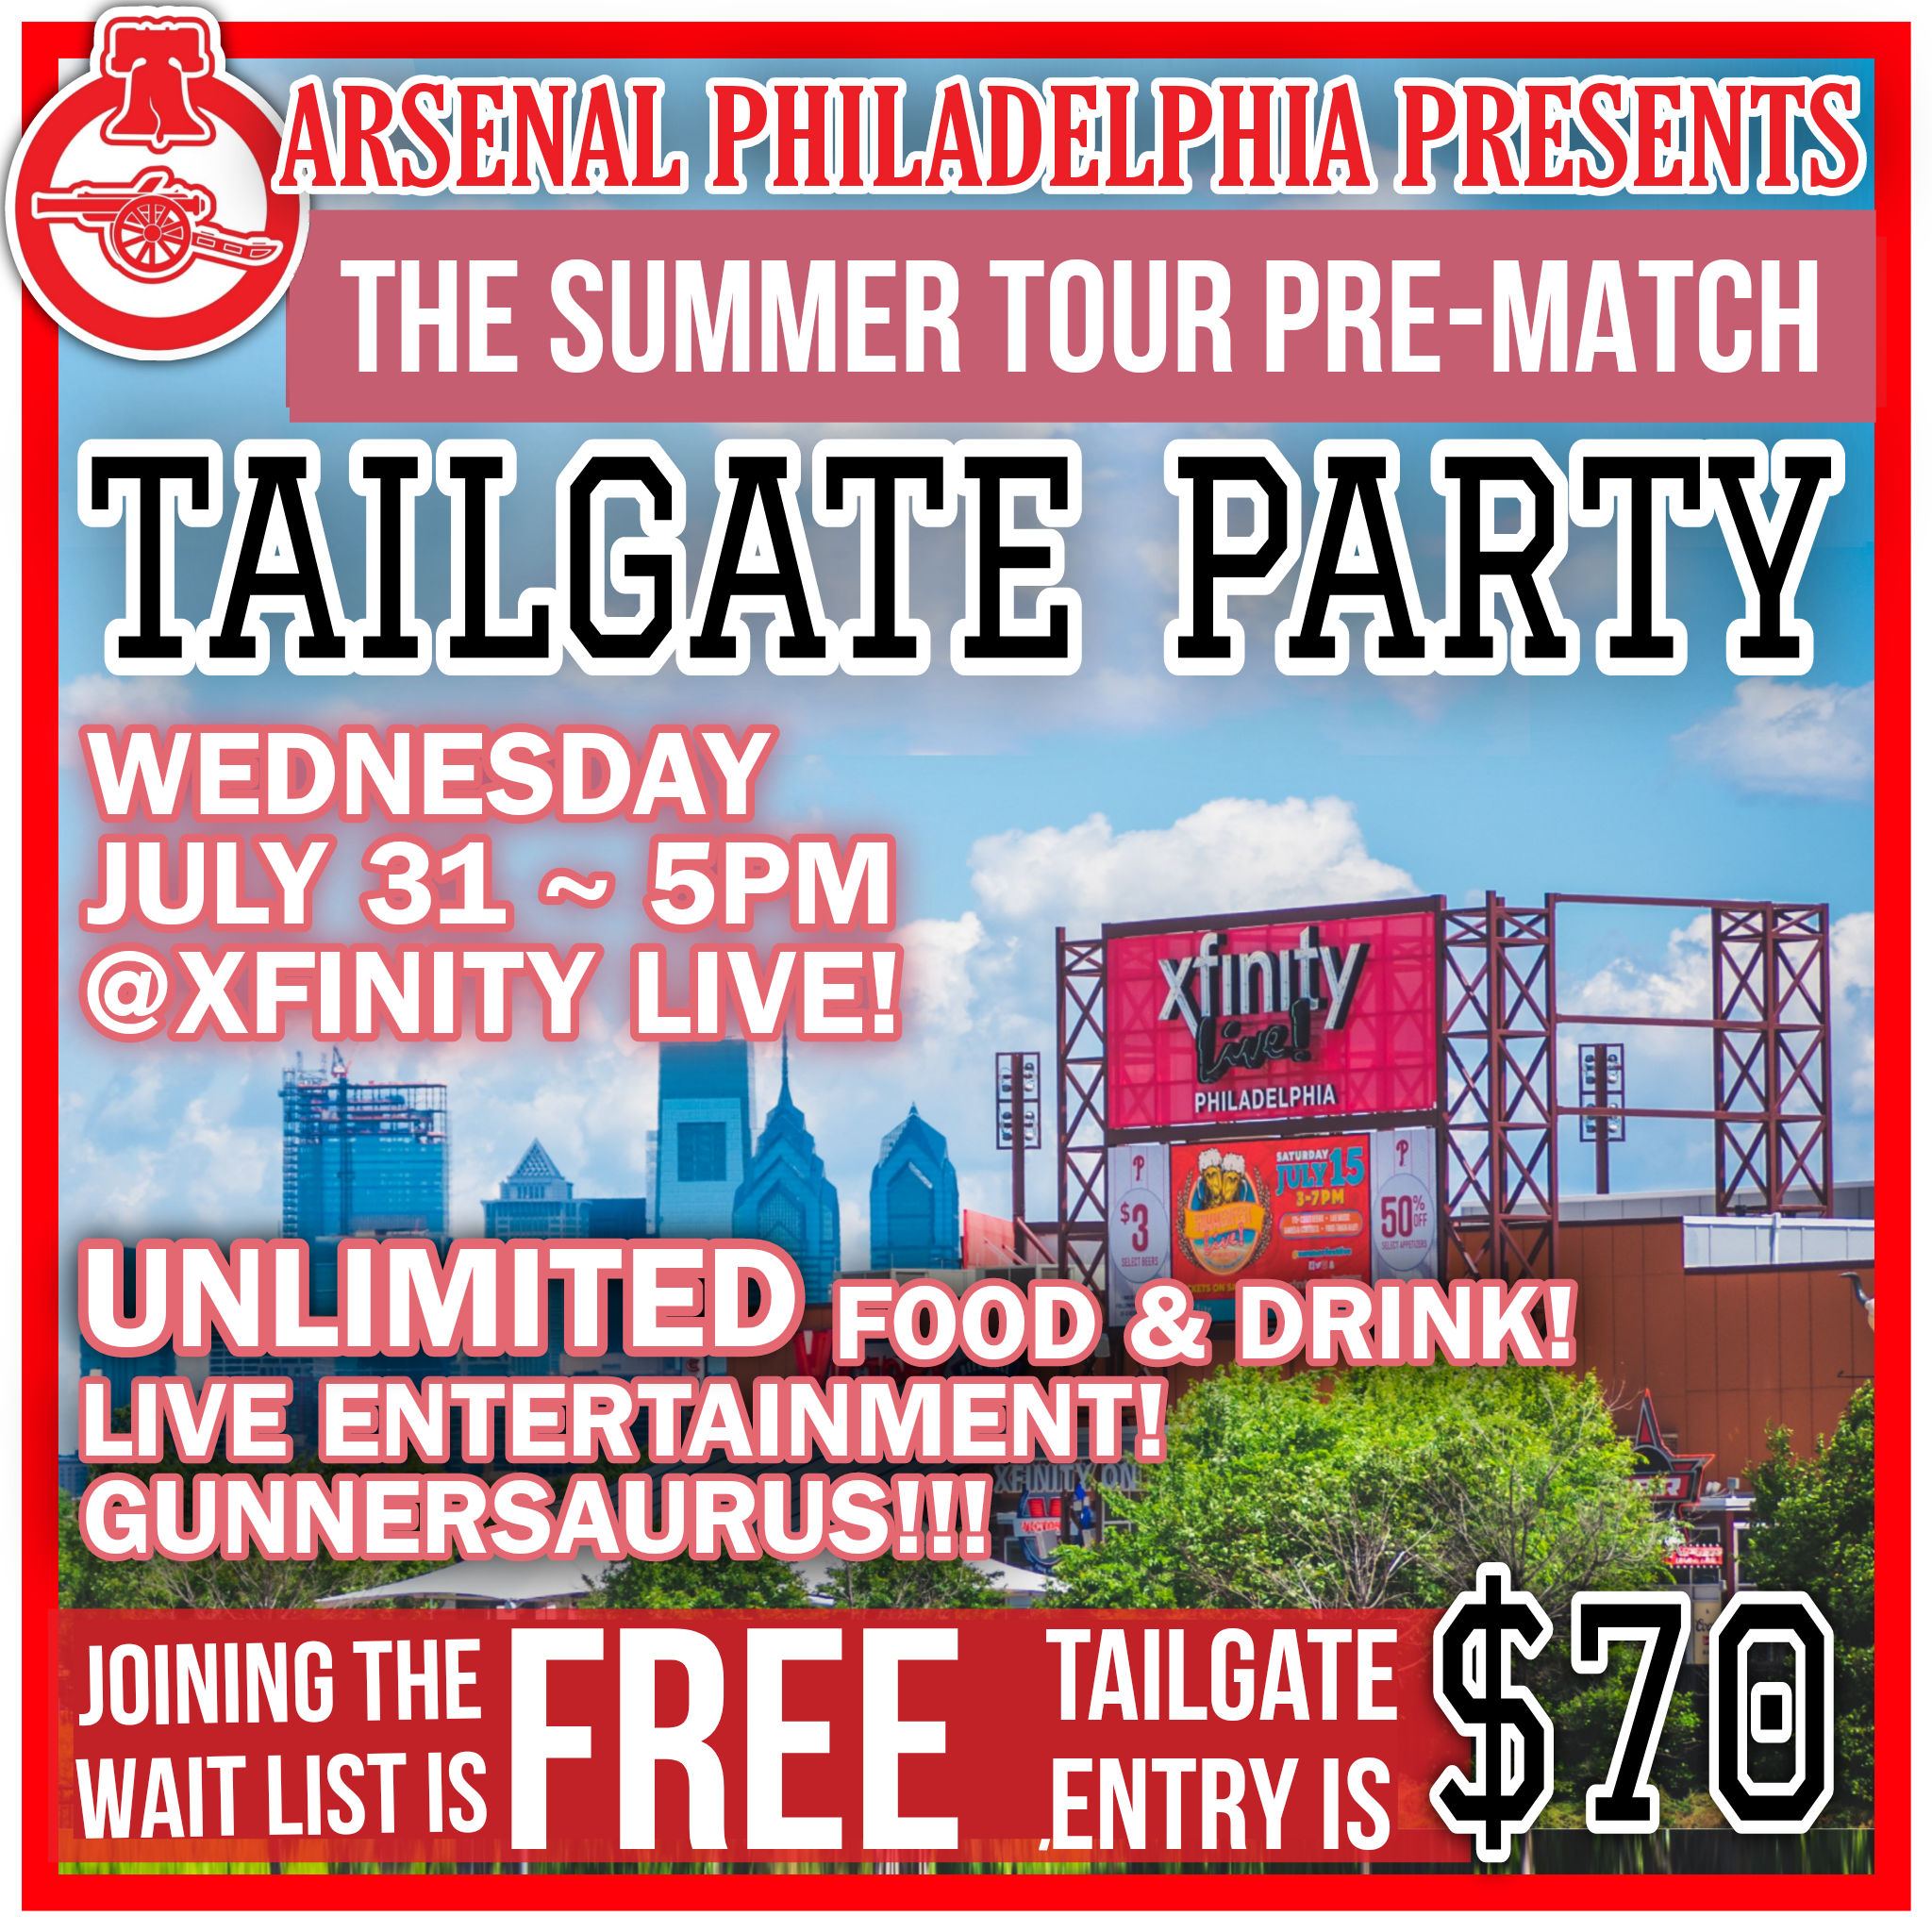 WAIT LIST for Pre-match tailgate at Xfinity Live